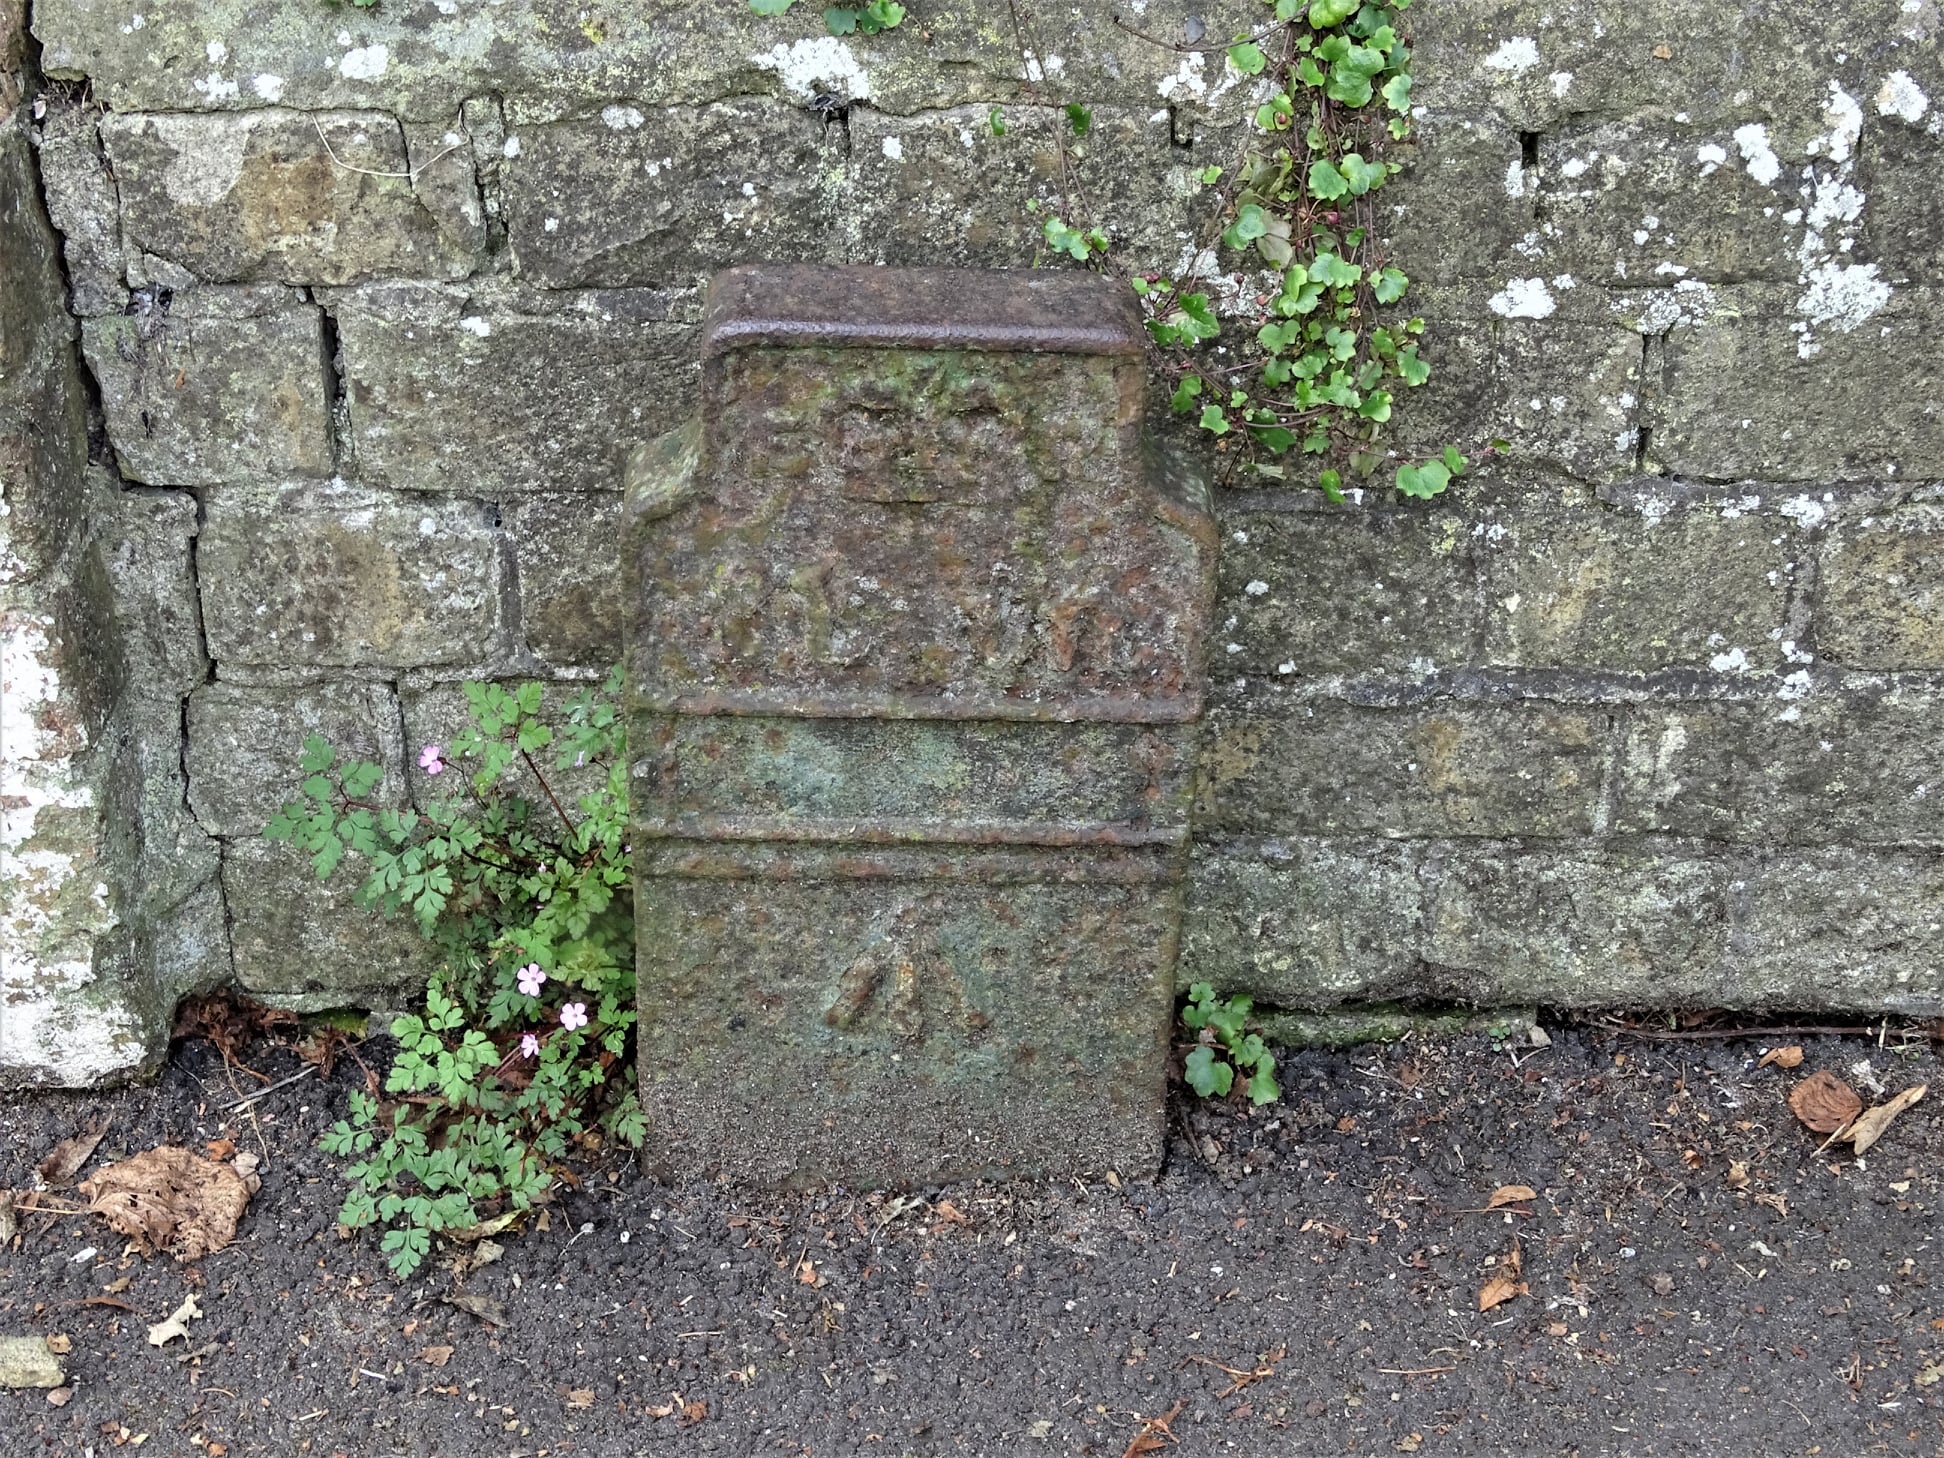 Telegraph cable marker post at 151 Sparrows Herne, Bushey, Herts by Stephen Danzig 